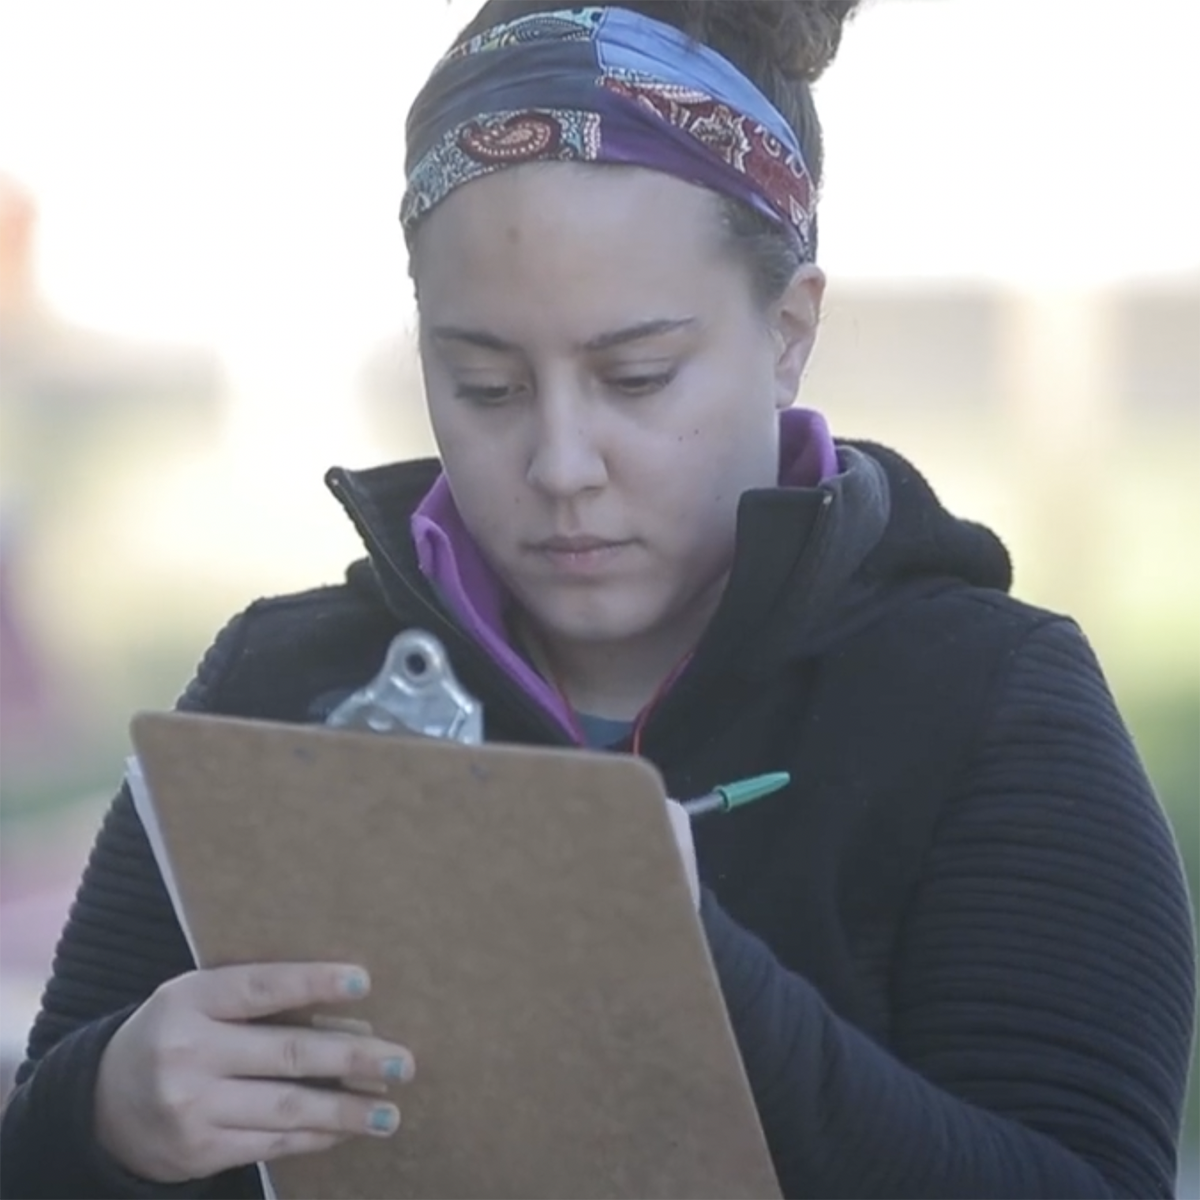 Photo of a young woman writing on a clipboard